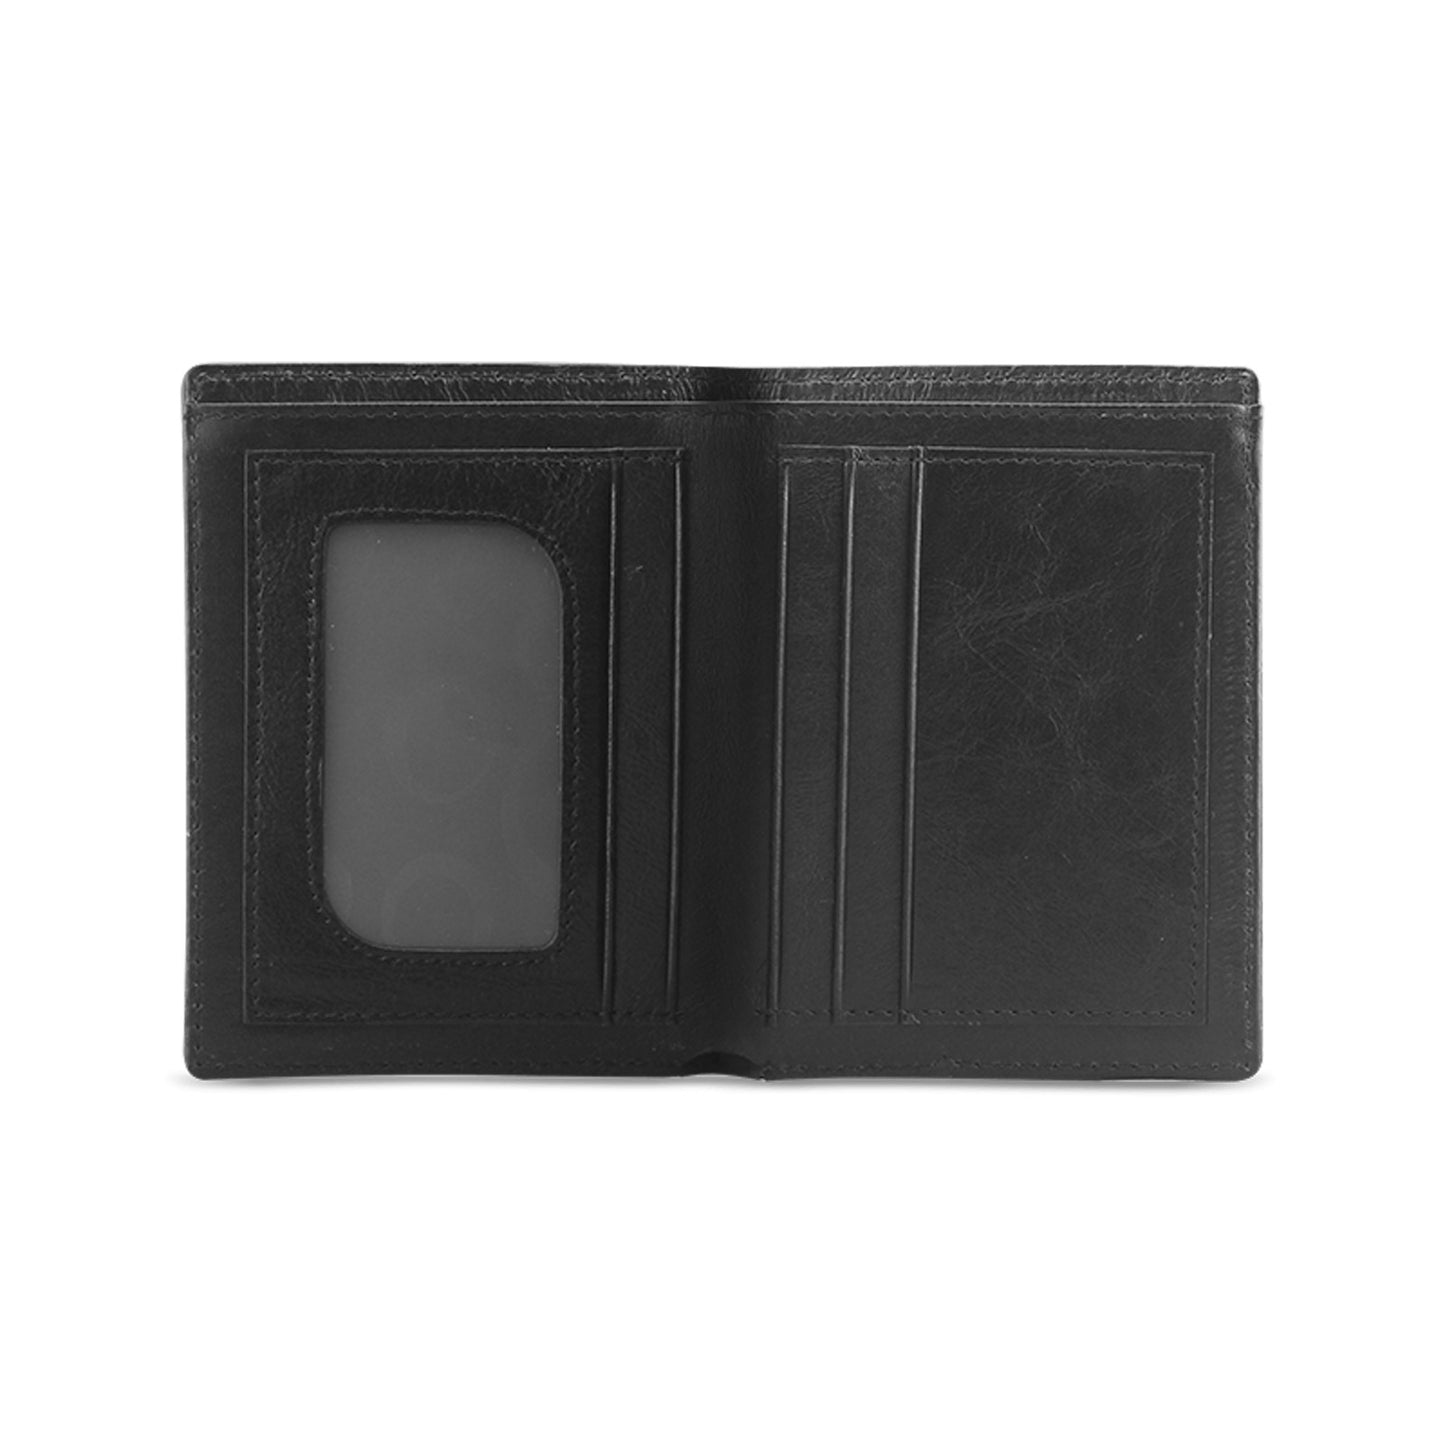 Minnie Tags Men's Leather Wallet